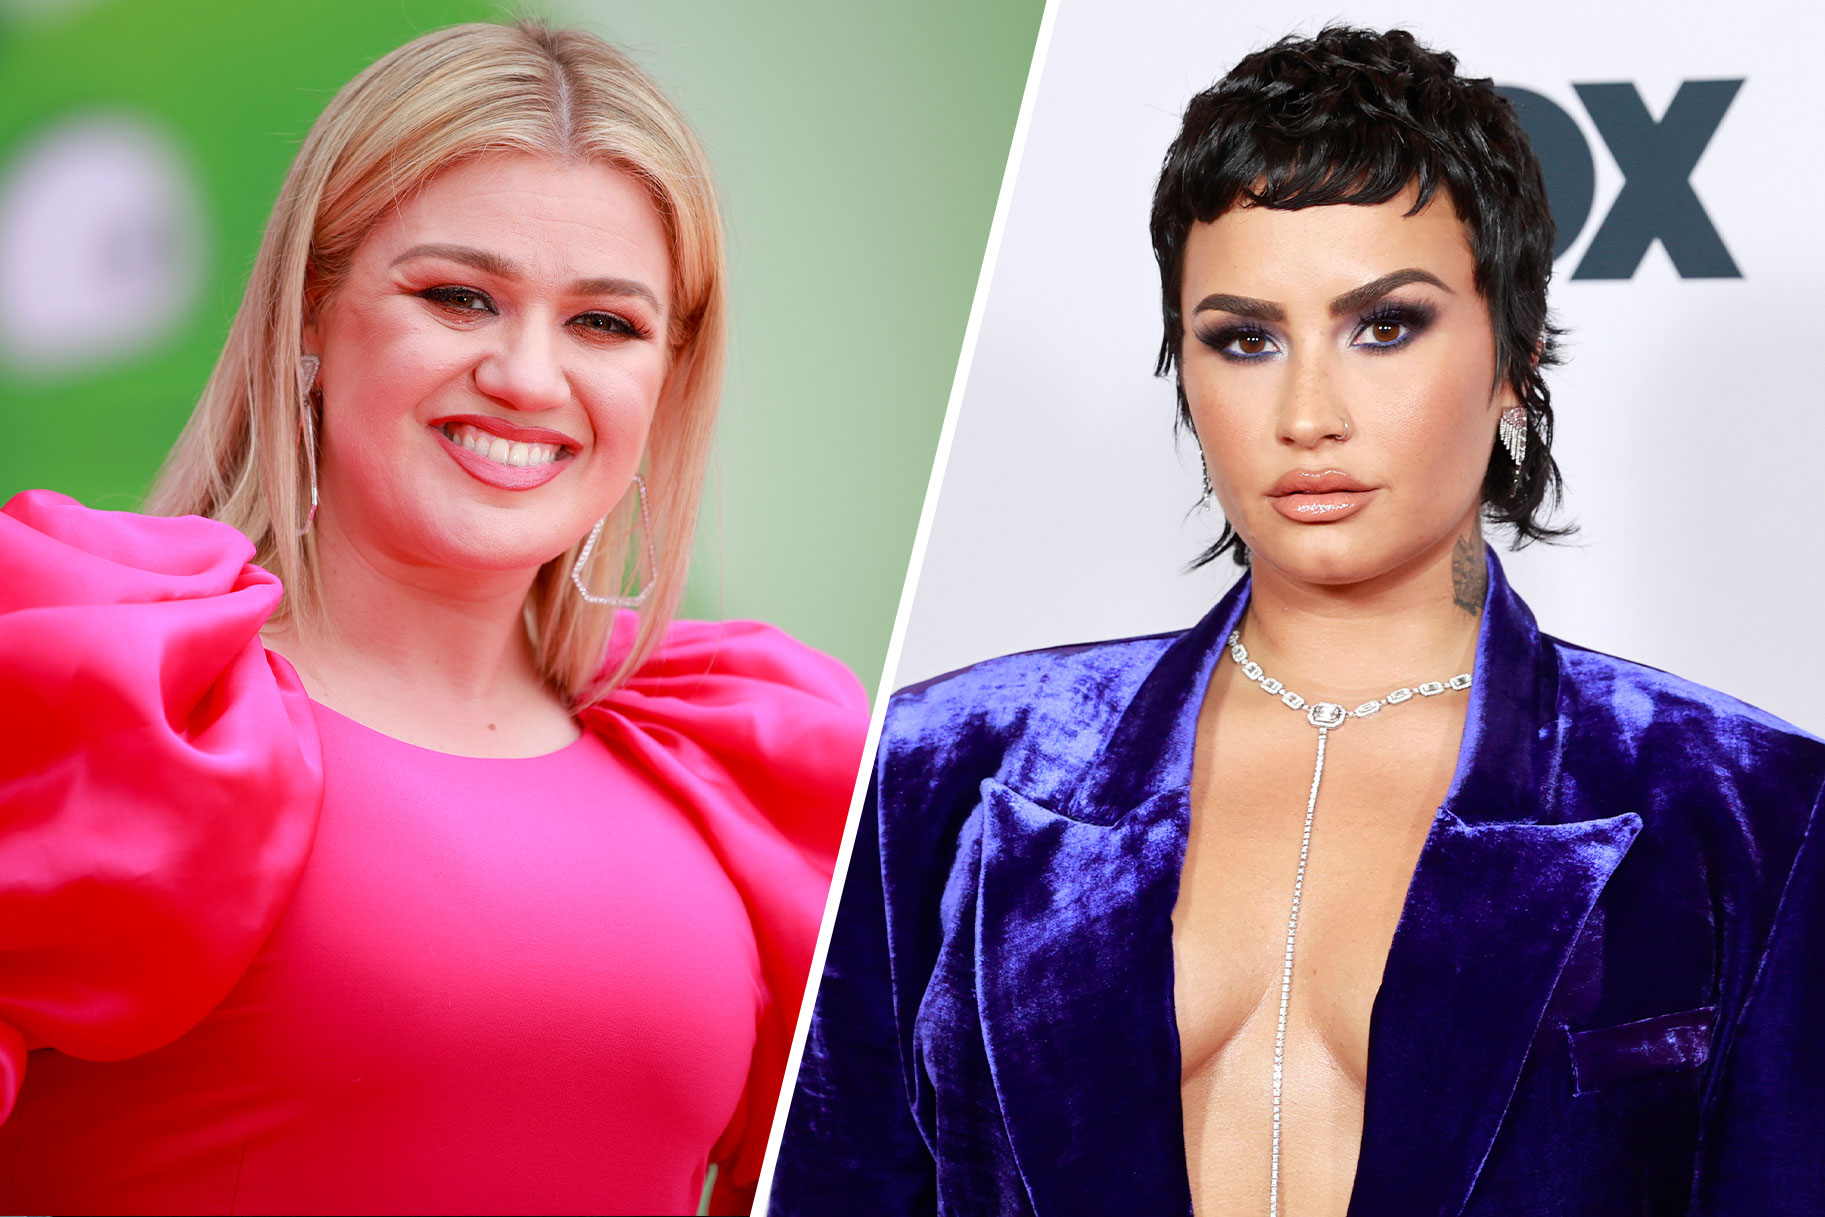 Split image of Kelly Clarkson and Demi Lovato